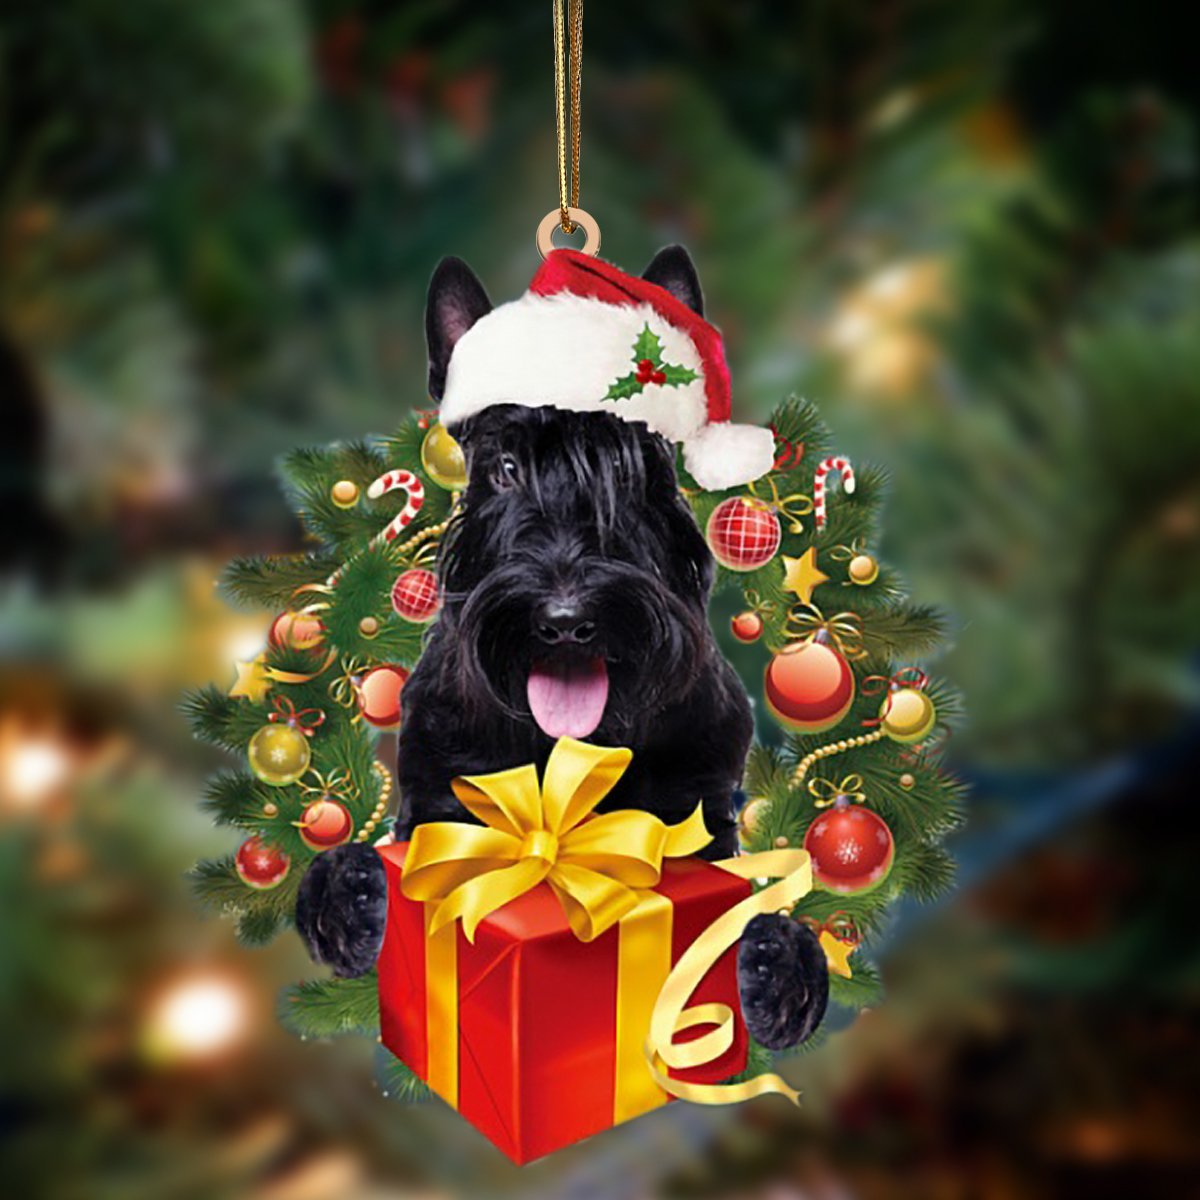 Scottish Terrier-Dogs give gifts Hanging Ornament